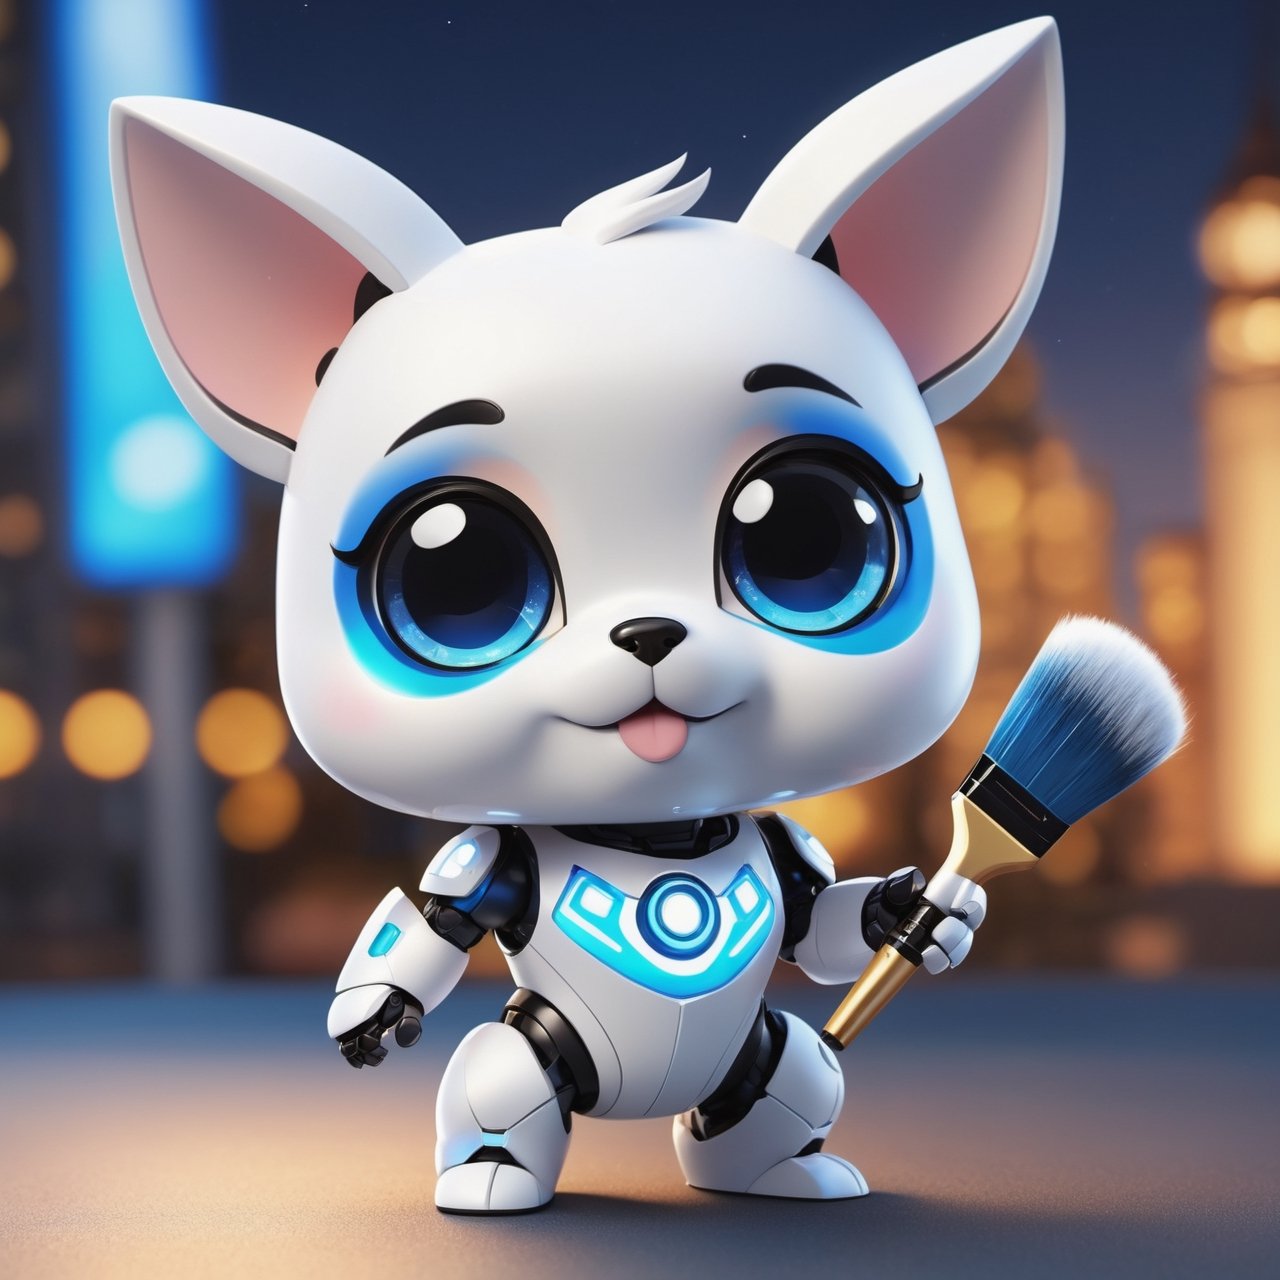 (masterpiece:1.2, highest quality), (realistic, photo_realistic:1.9)
1chibi_robot, Cute chibi robot, Designer look holding a paintbrush in one hand, white with blue, (detailed background), (gradients), colorful, detailed landscape, visual key, shiny skin. Modern place, Action camera. Portrait film. Standard lens. Golden hour lighting.
sharp focus, 8k, UHD, high quality, frowning, intricate detailed, highly detailed, hyper-realistic,interior,doggy Chibi,chibi emote style